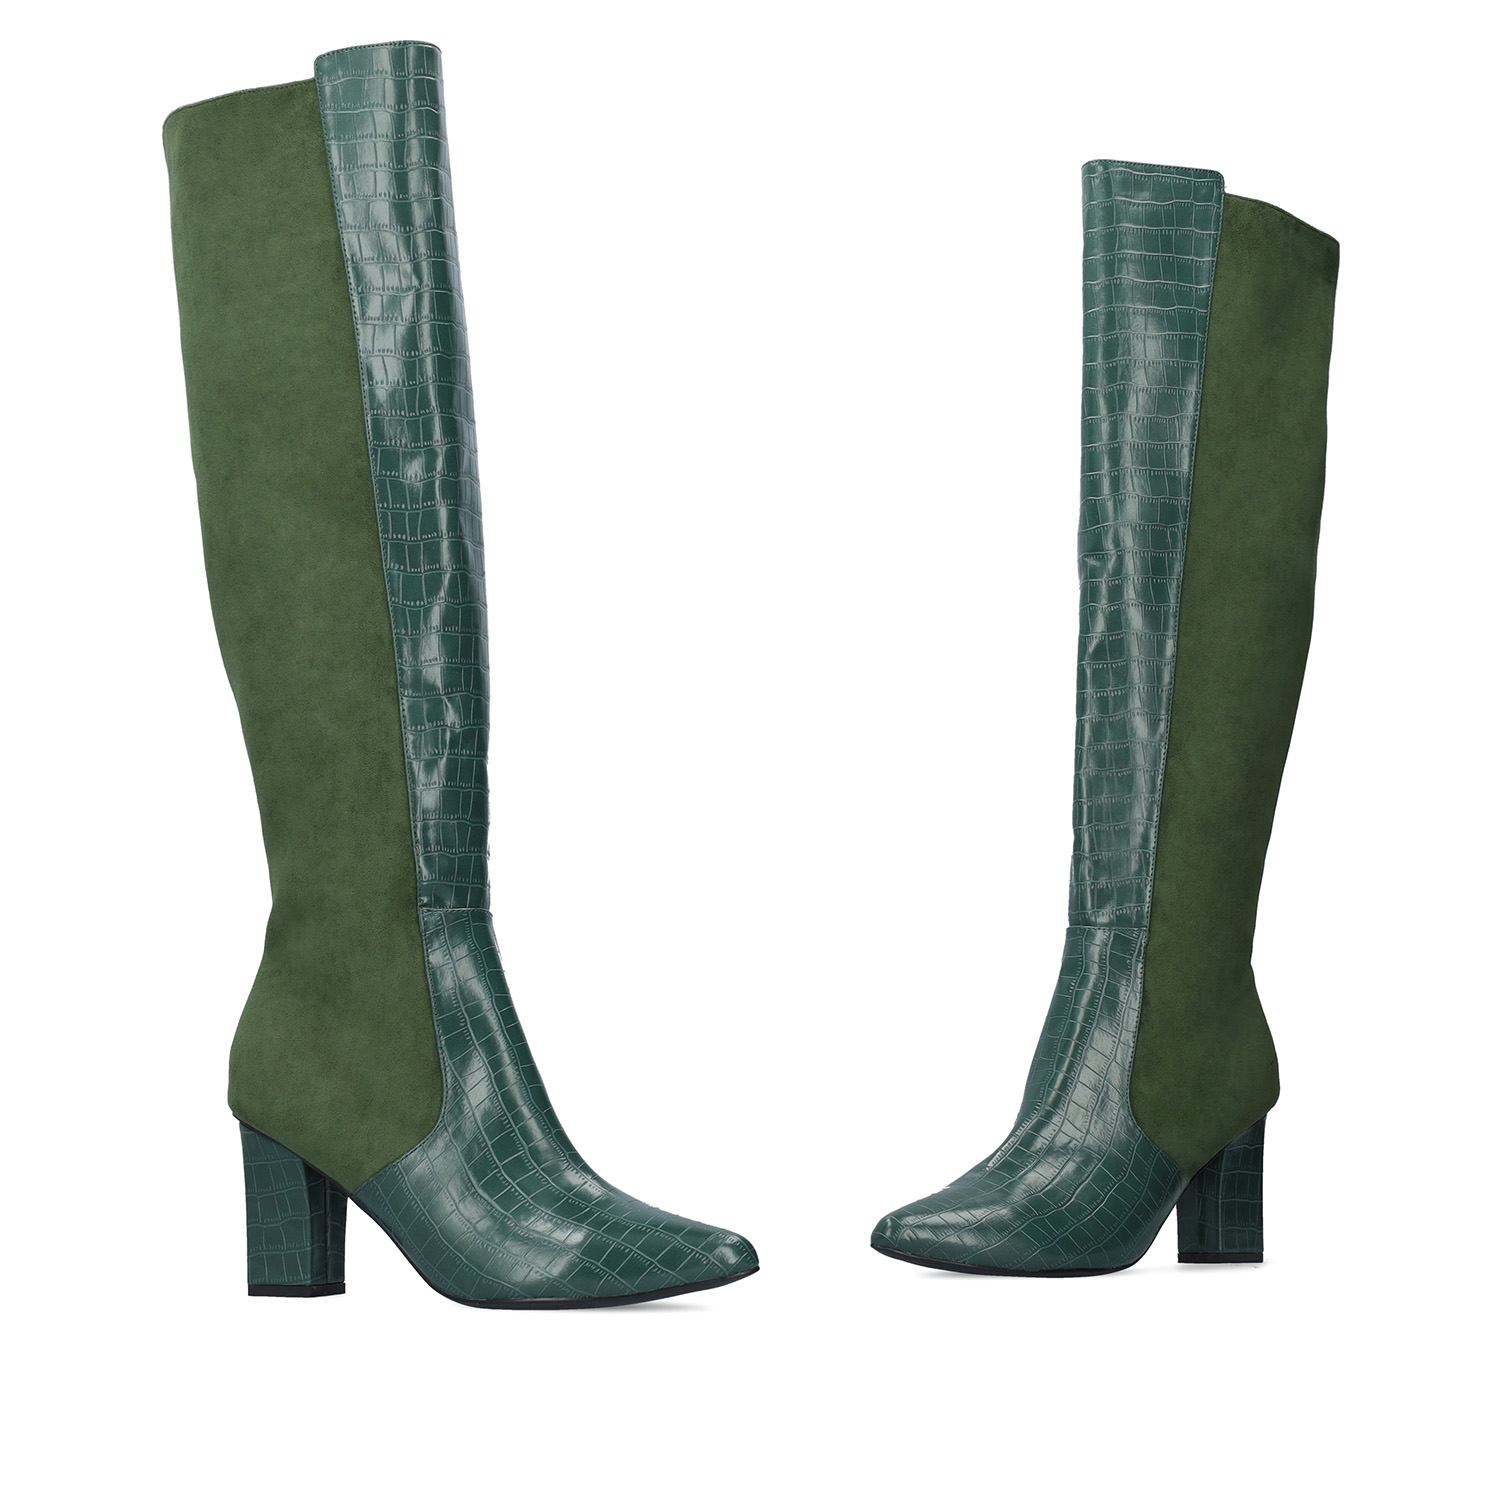 Heeled knee-high boots combined green faux croc leather with faux suede. 